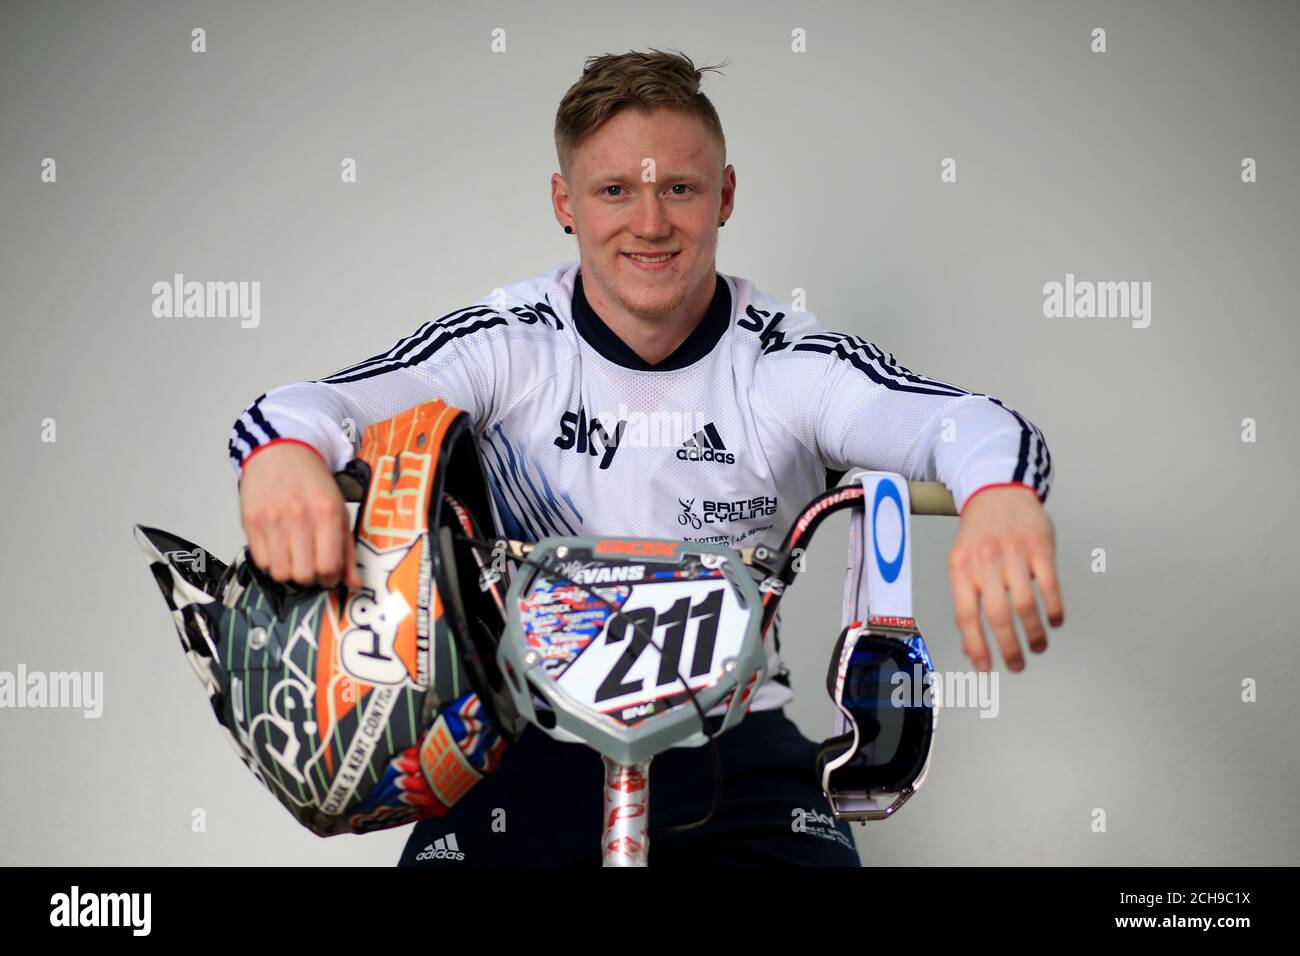 Afwezigheid labyrint synoniemenlijst Great Britain BMX rider Kyle Evans poses during the photocall at the  National Cycle Centre in Manchester Stock Photo - Alamy